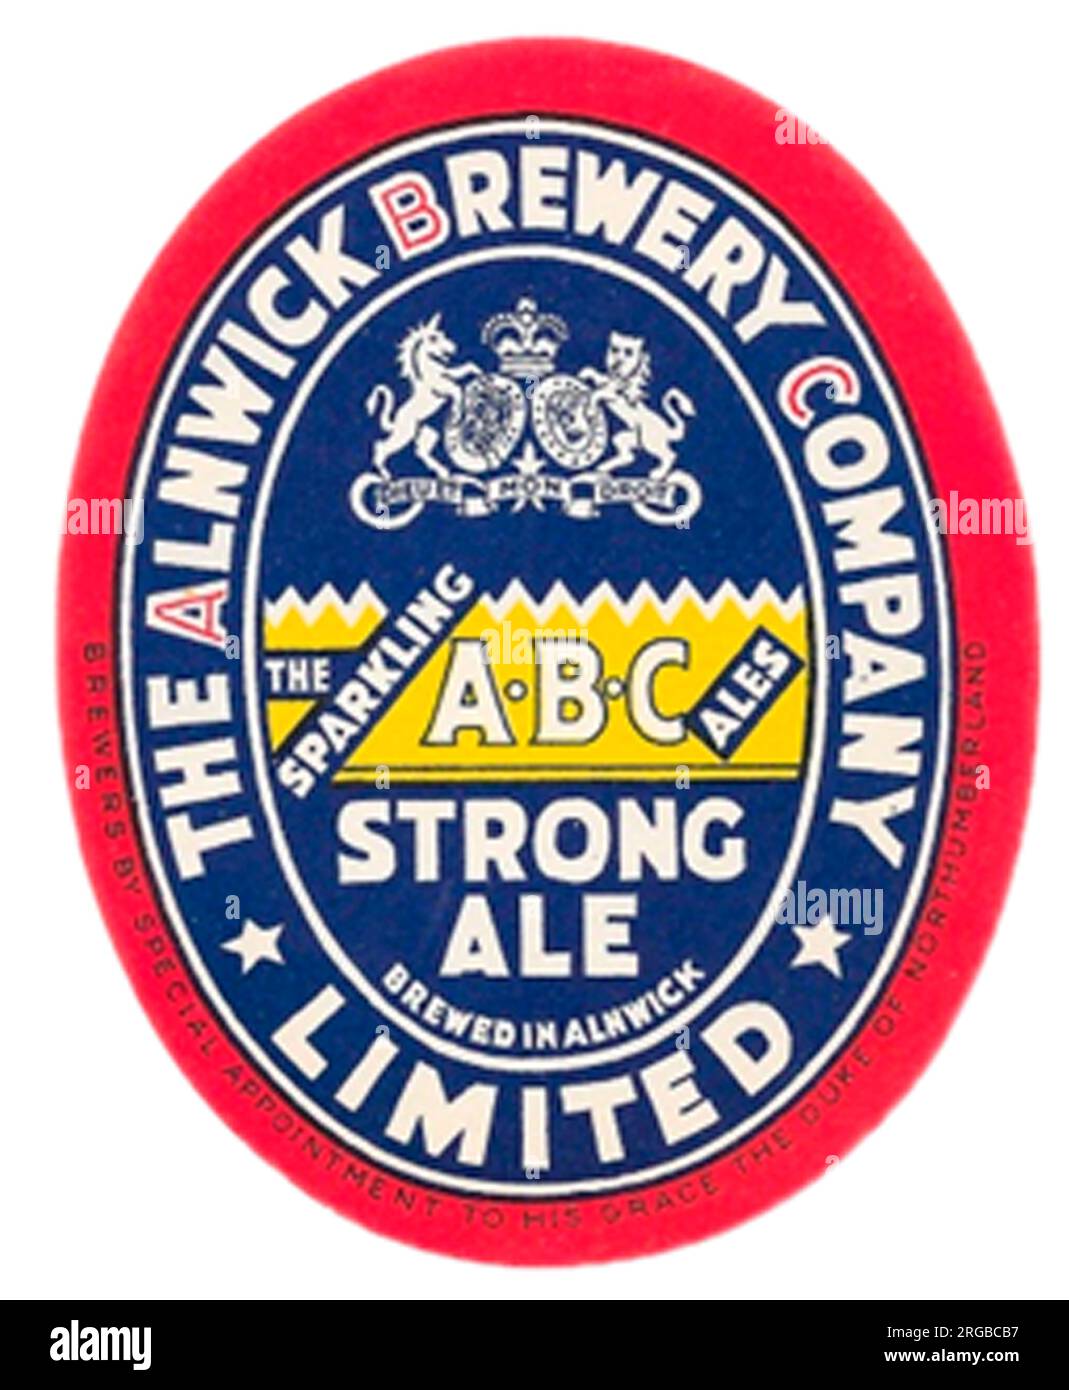 Alnwick Brewery Strong Ale Stock Photo